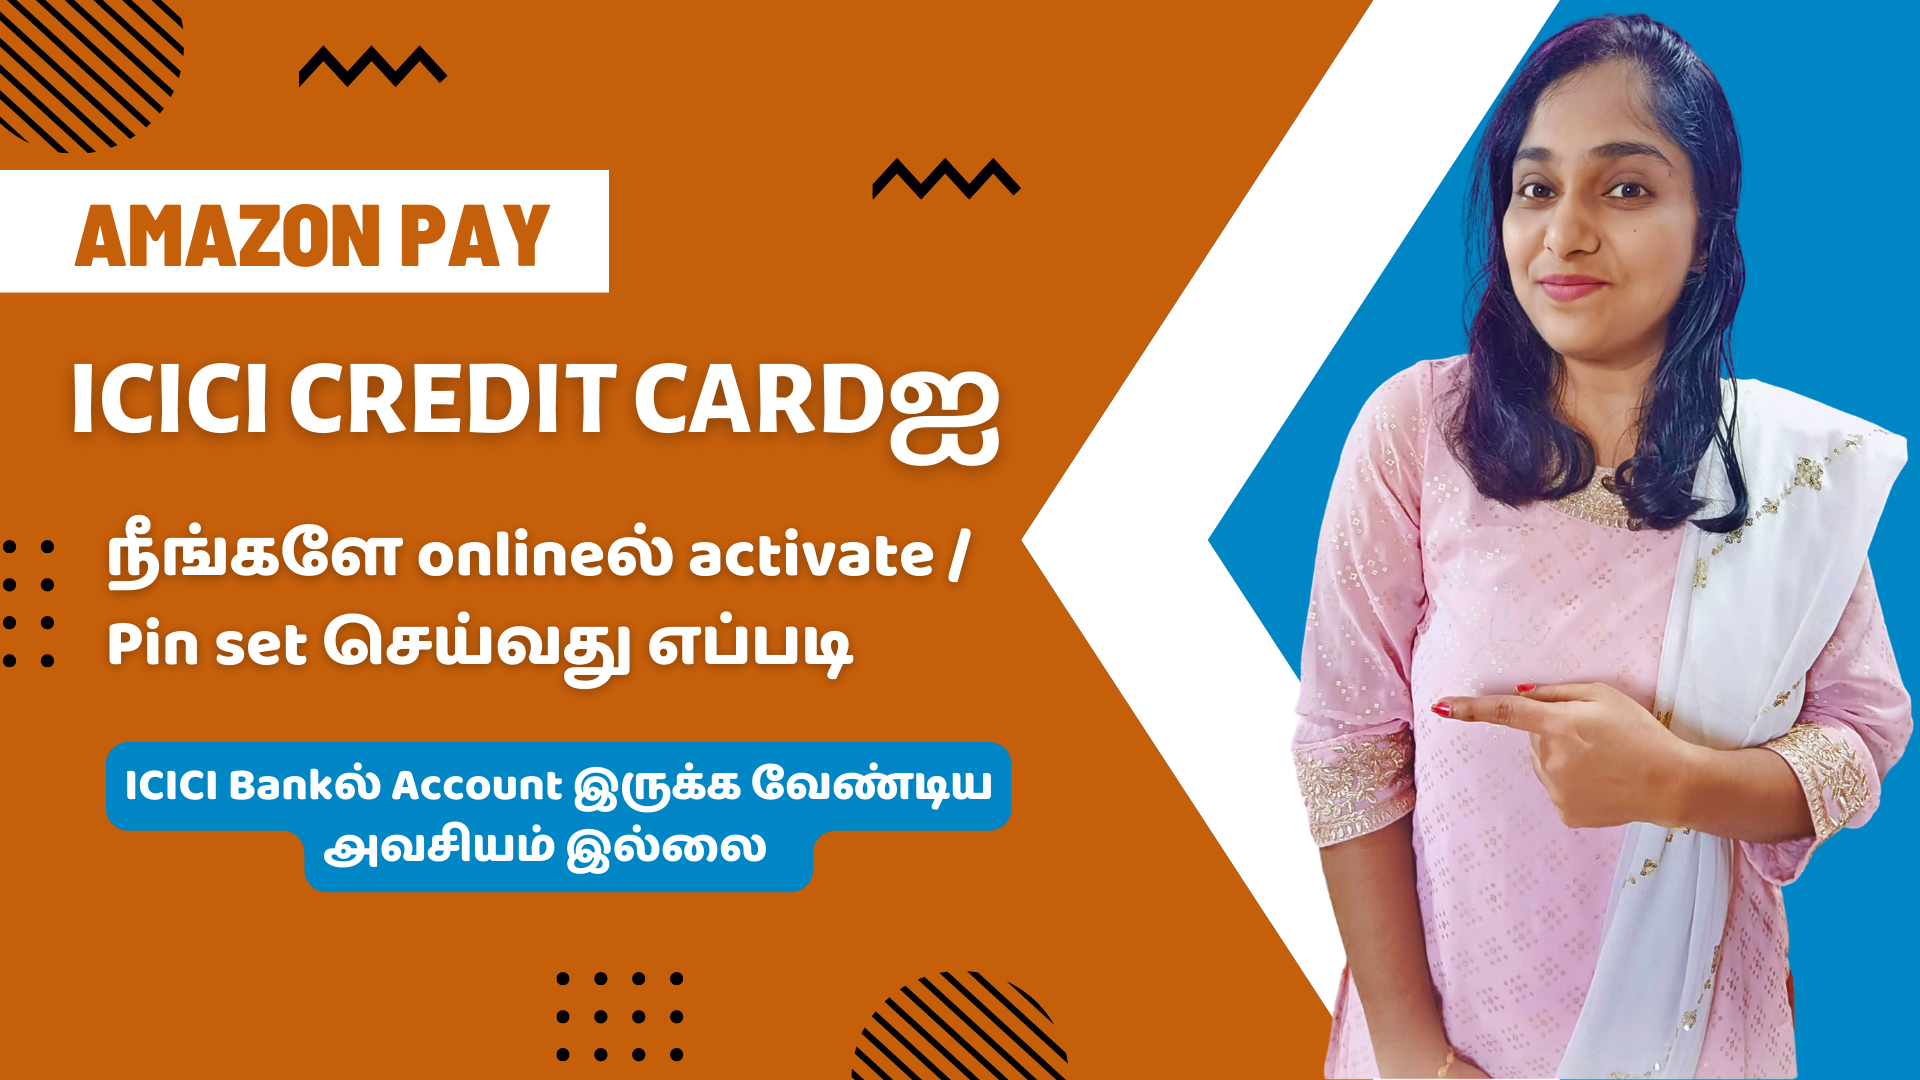 Amazon Pay ICICI Credit Card Activation & Pin Generation [You Don't Need ICICI Bank Account] Demo